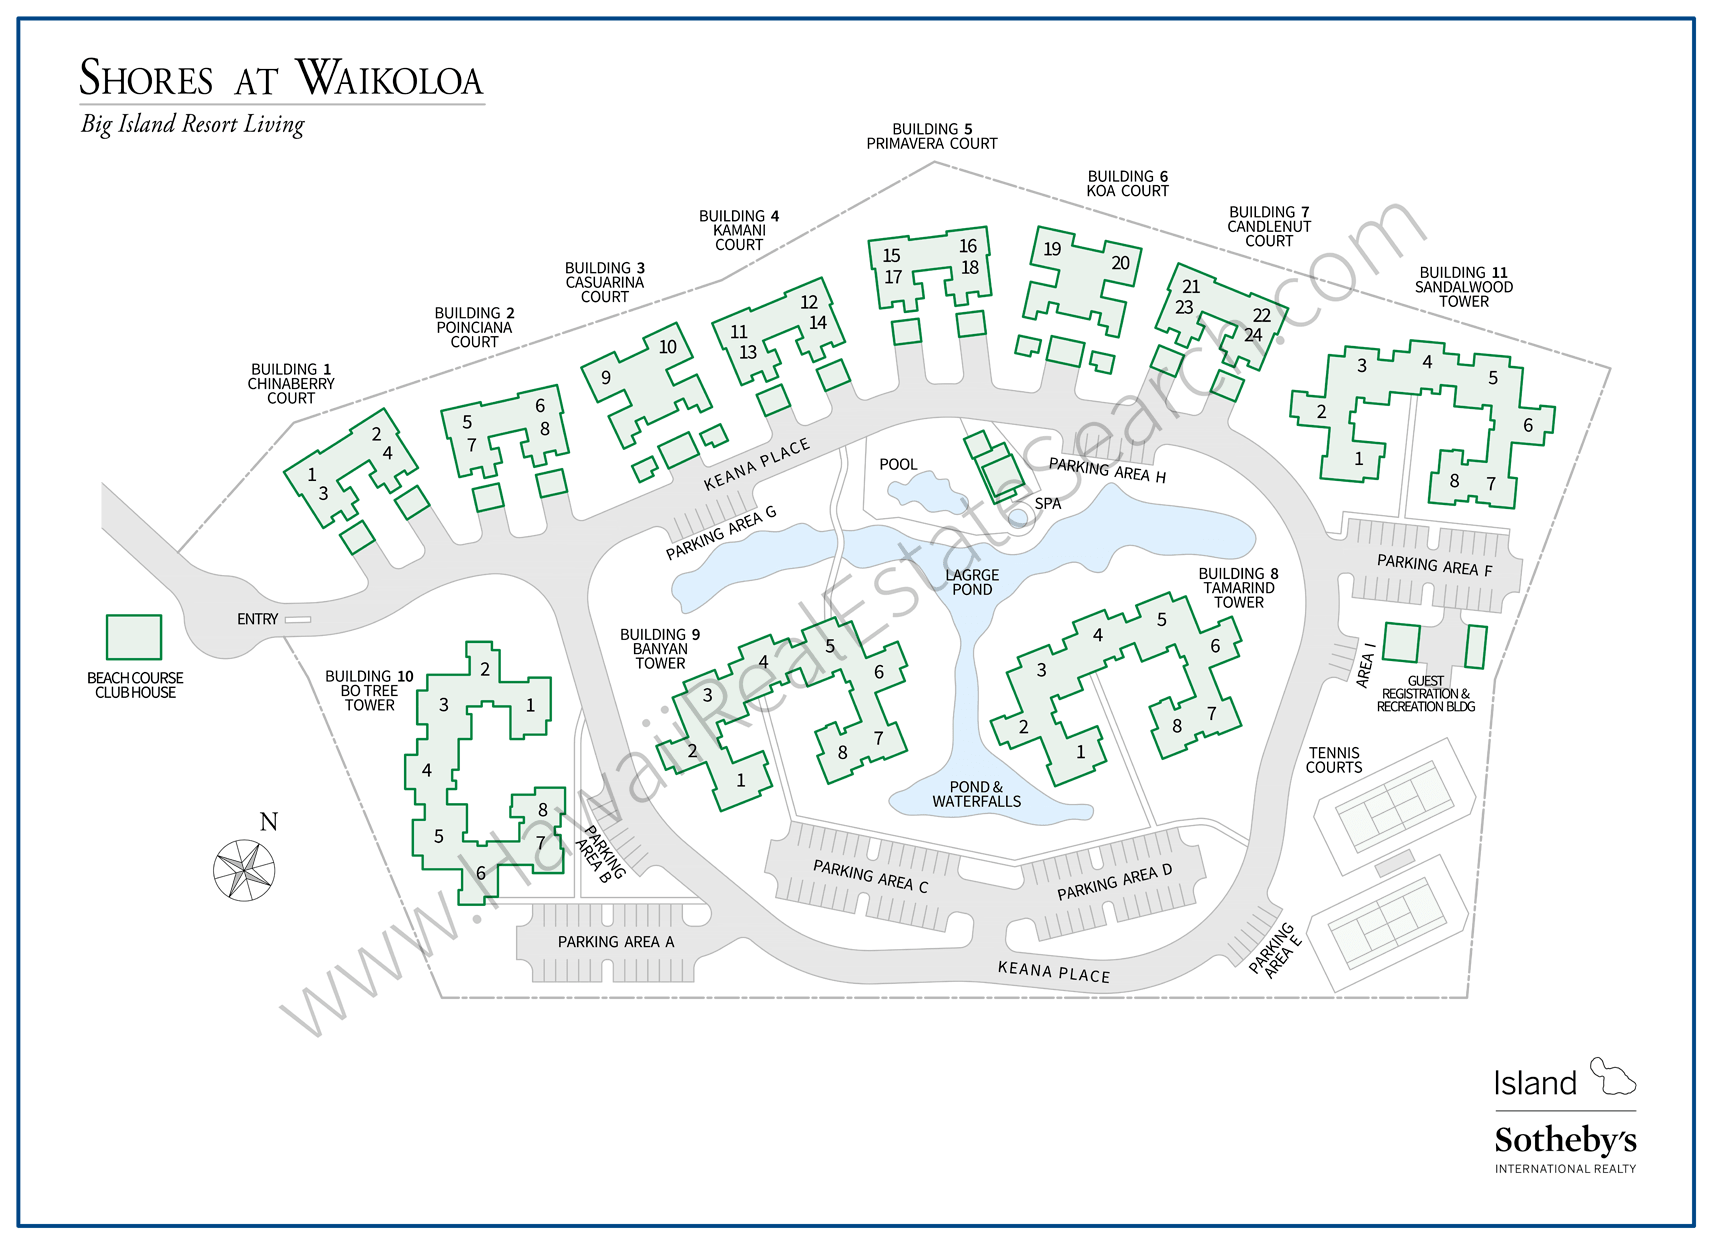 Shores at Waikoloa Property Map Updated